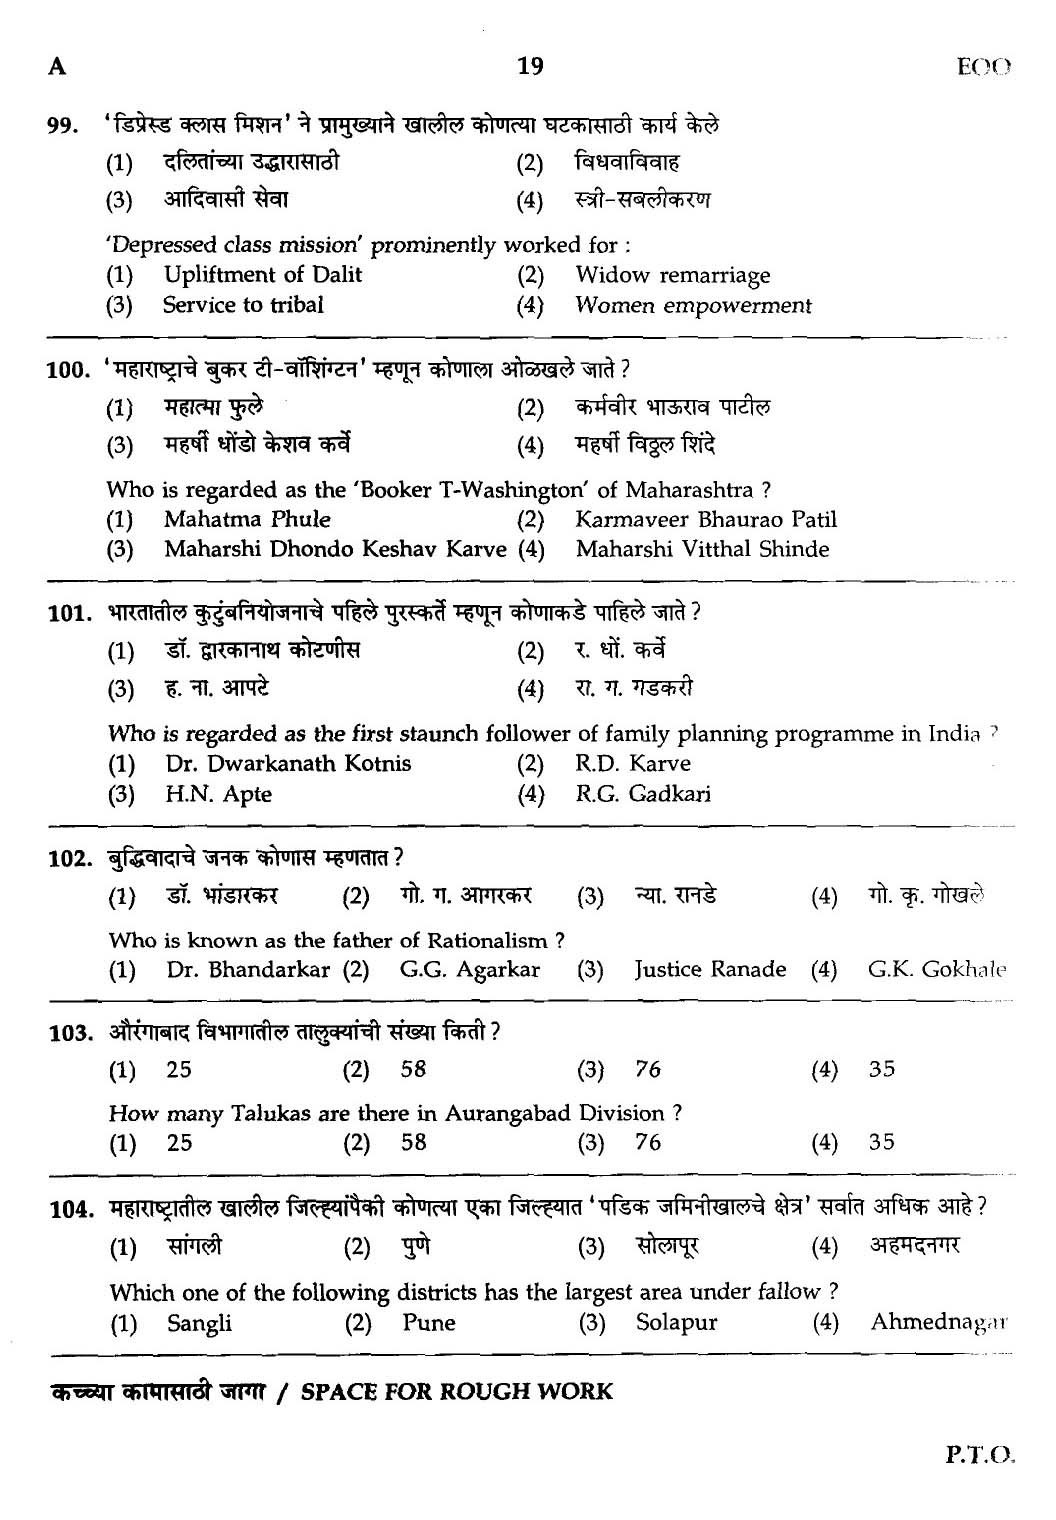 MPSC Agricultural Services Preliminary Exam 2012 Question Paper 18